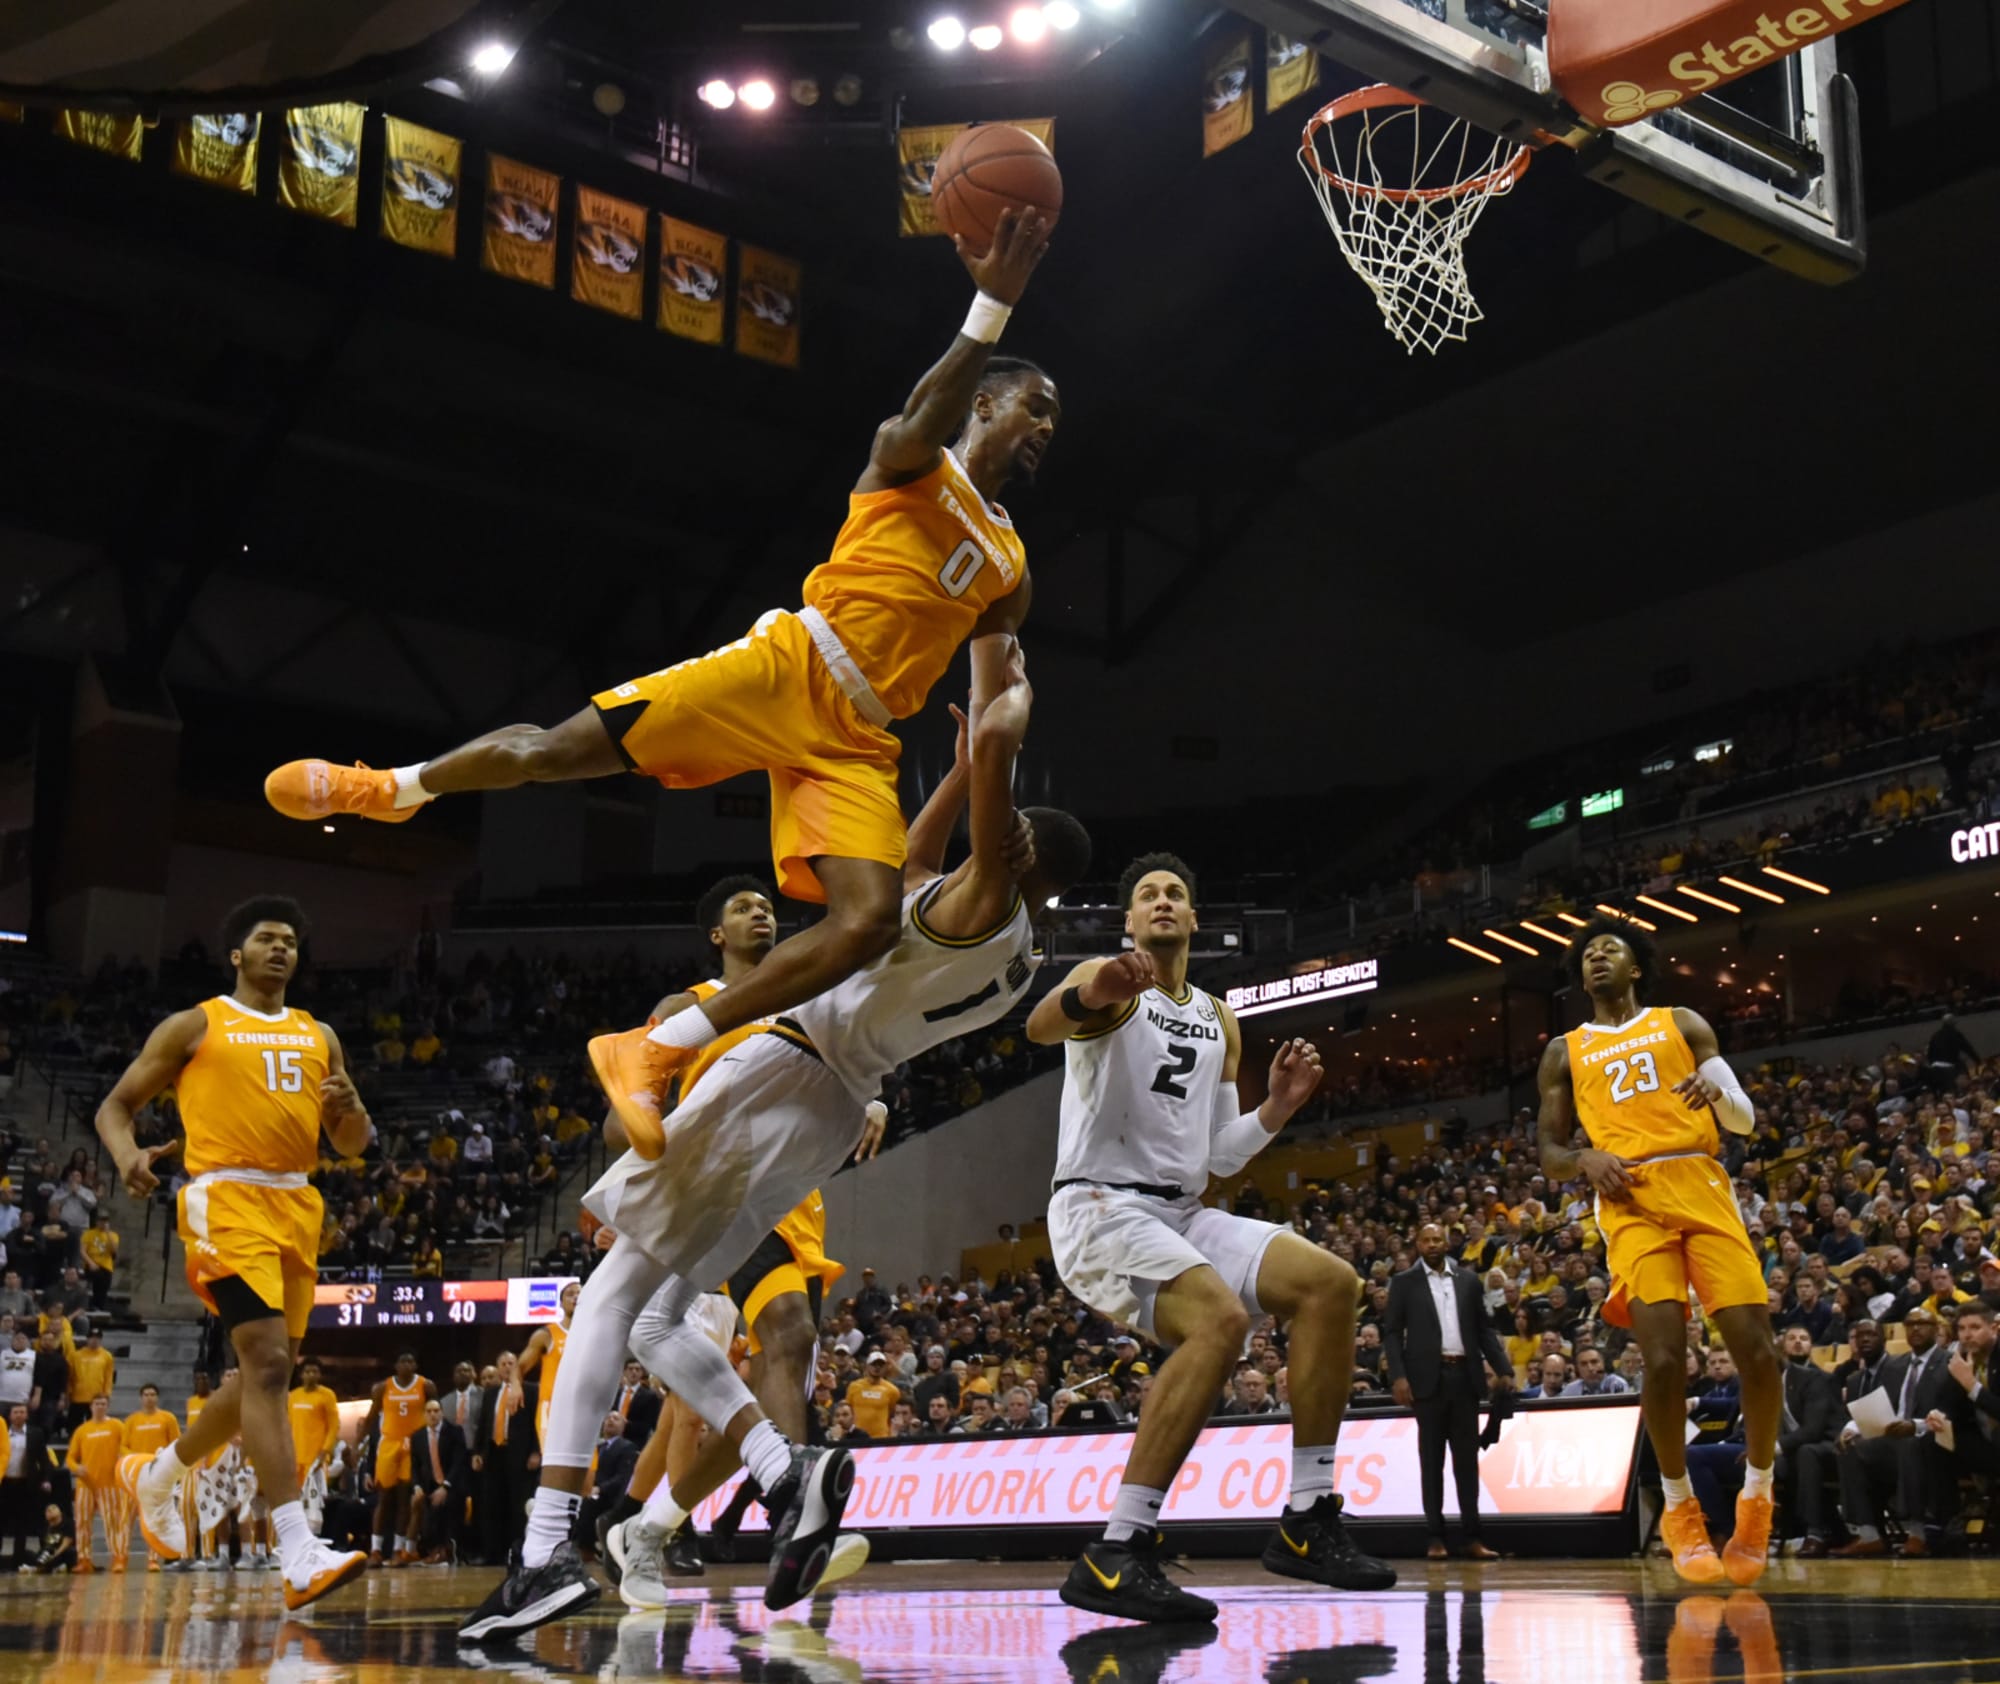 Tennessee basketball Vols improve to 20 in SEC play by rolling Missouri